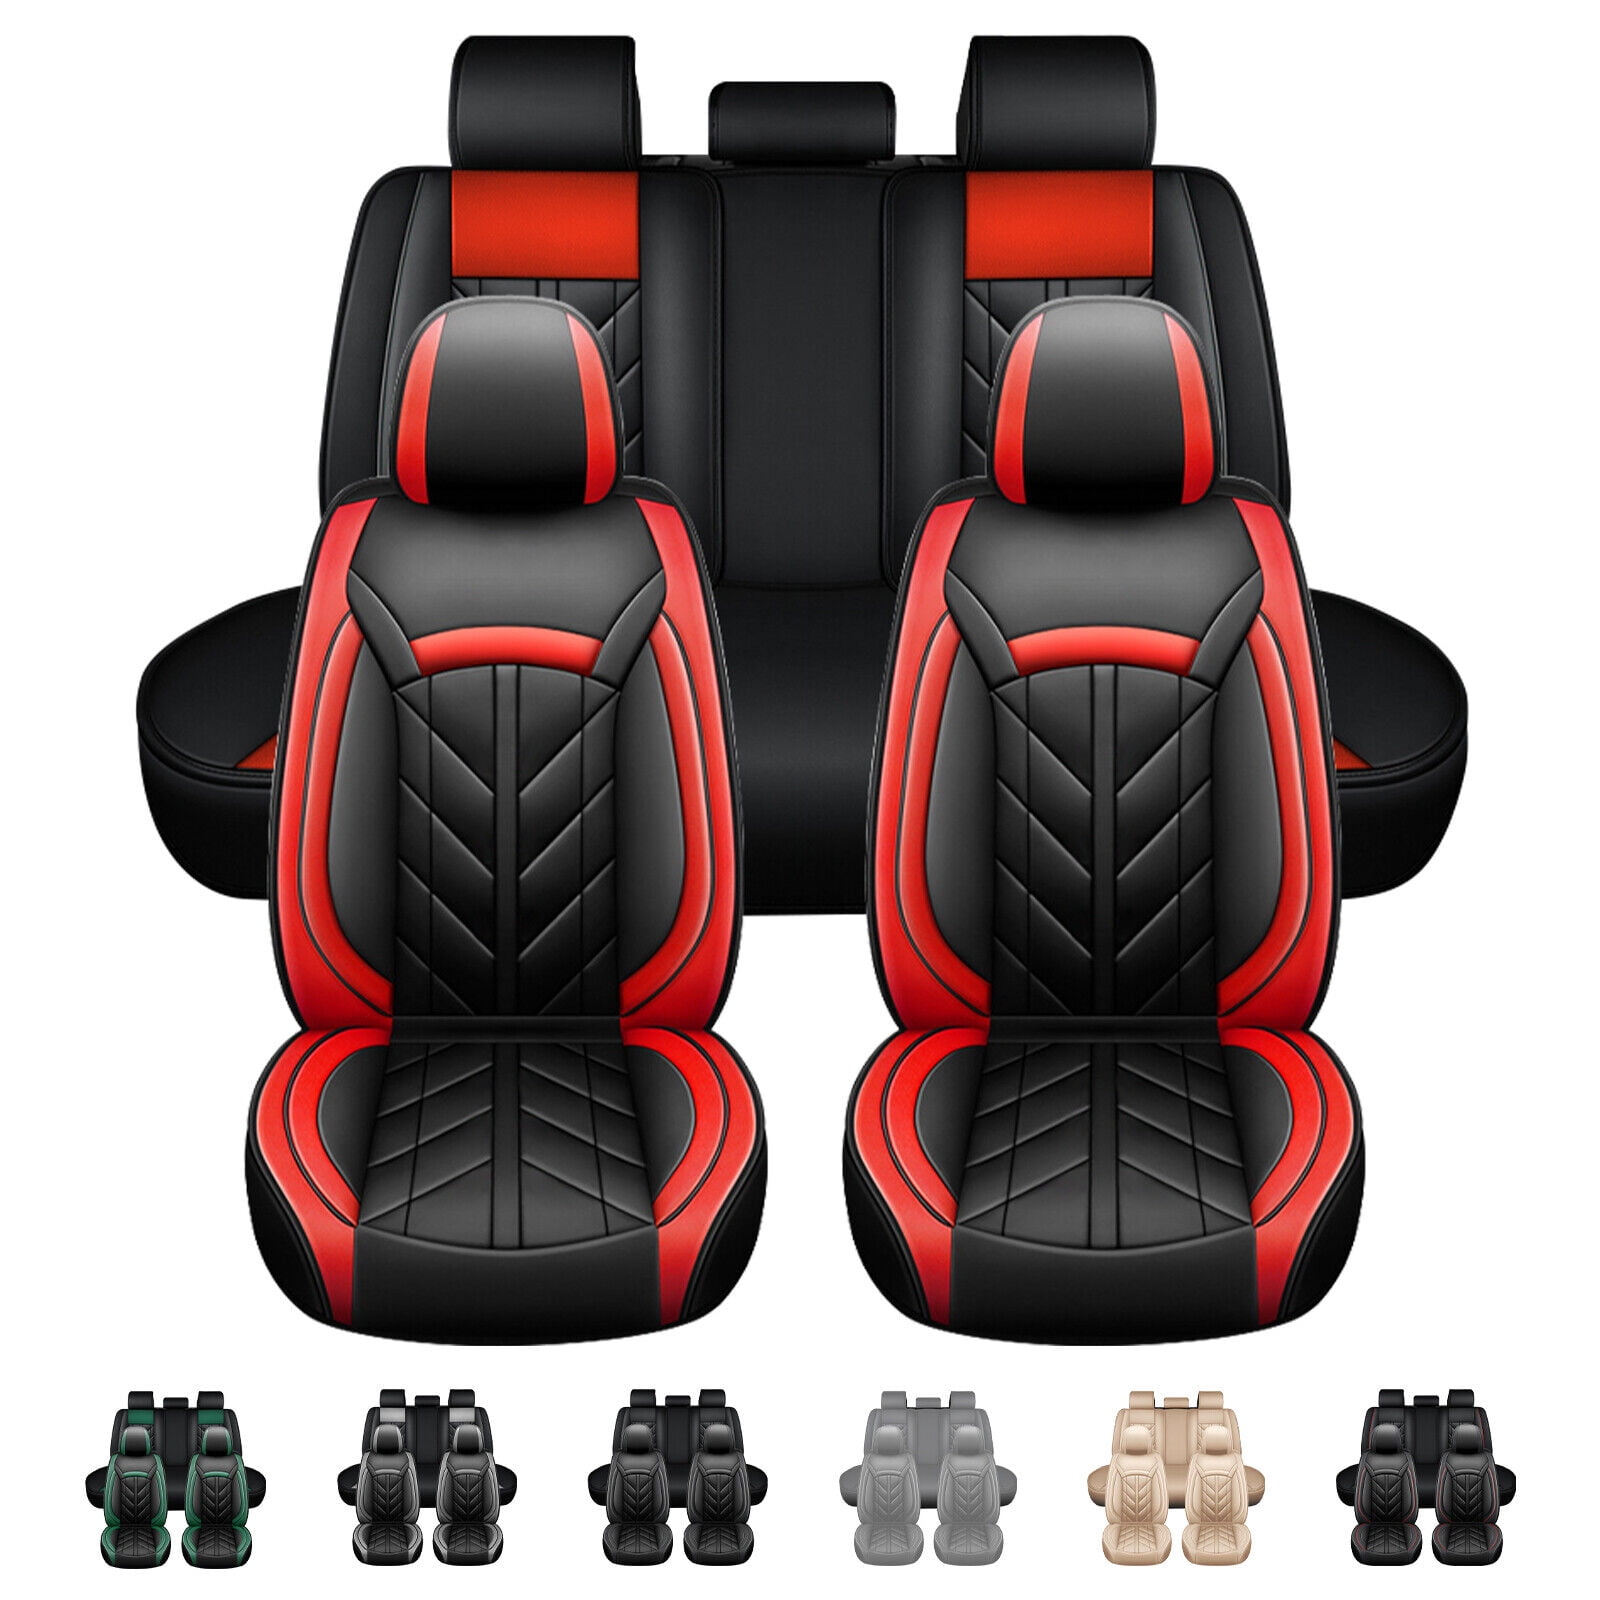 Deluxe Black Red PU Leather Full set Seat Covers For Honda Accord CR-V HR-V